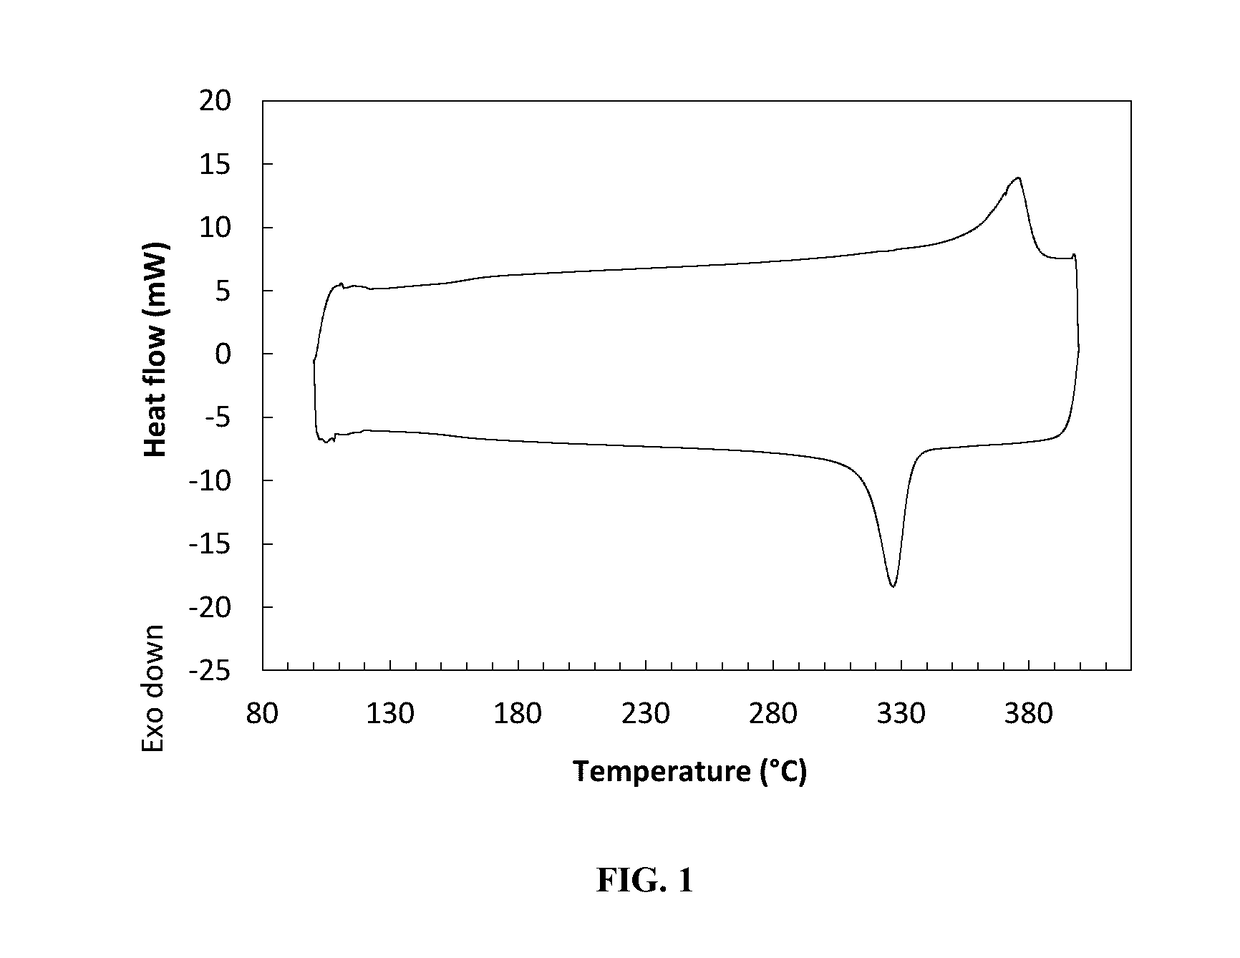 Powder coating compositions for reducing friction and wear in high temperature high pressure applications